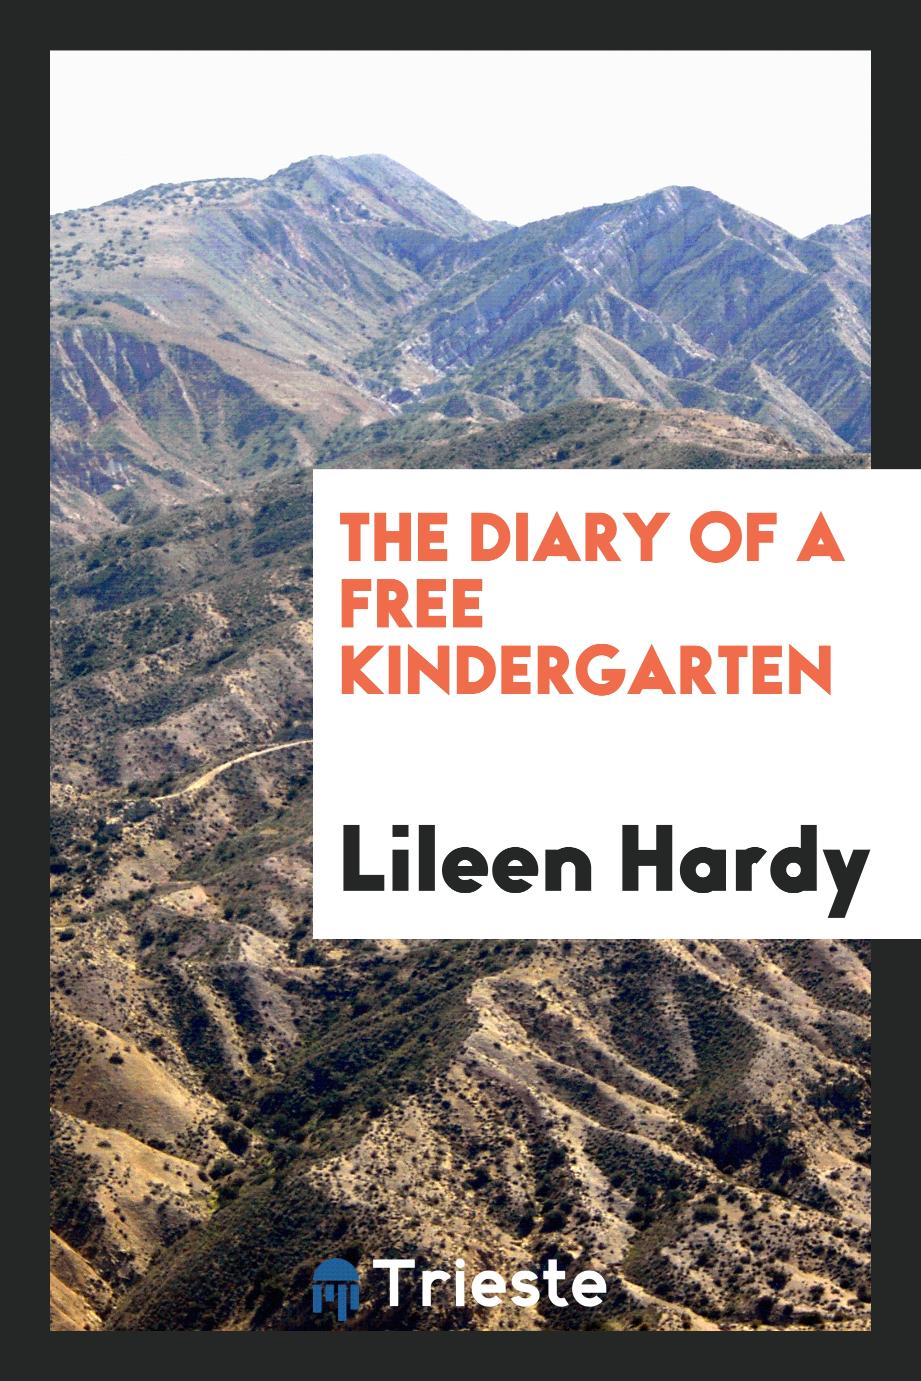 The diary of a free kindergarten